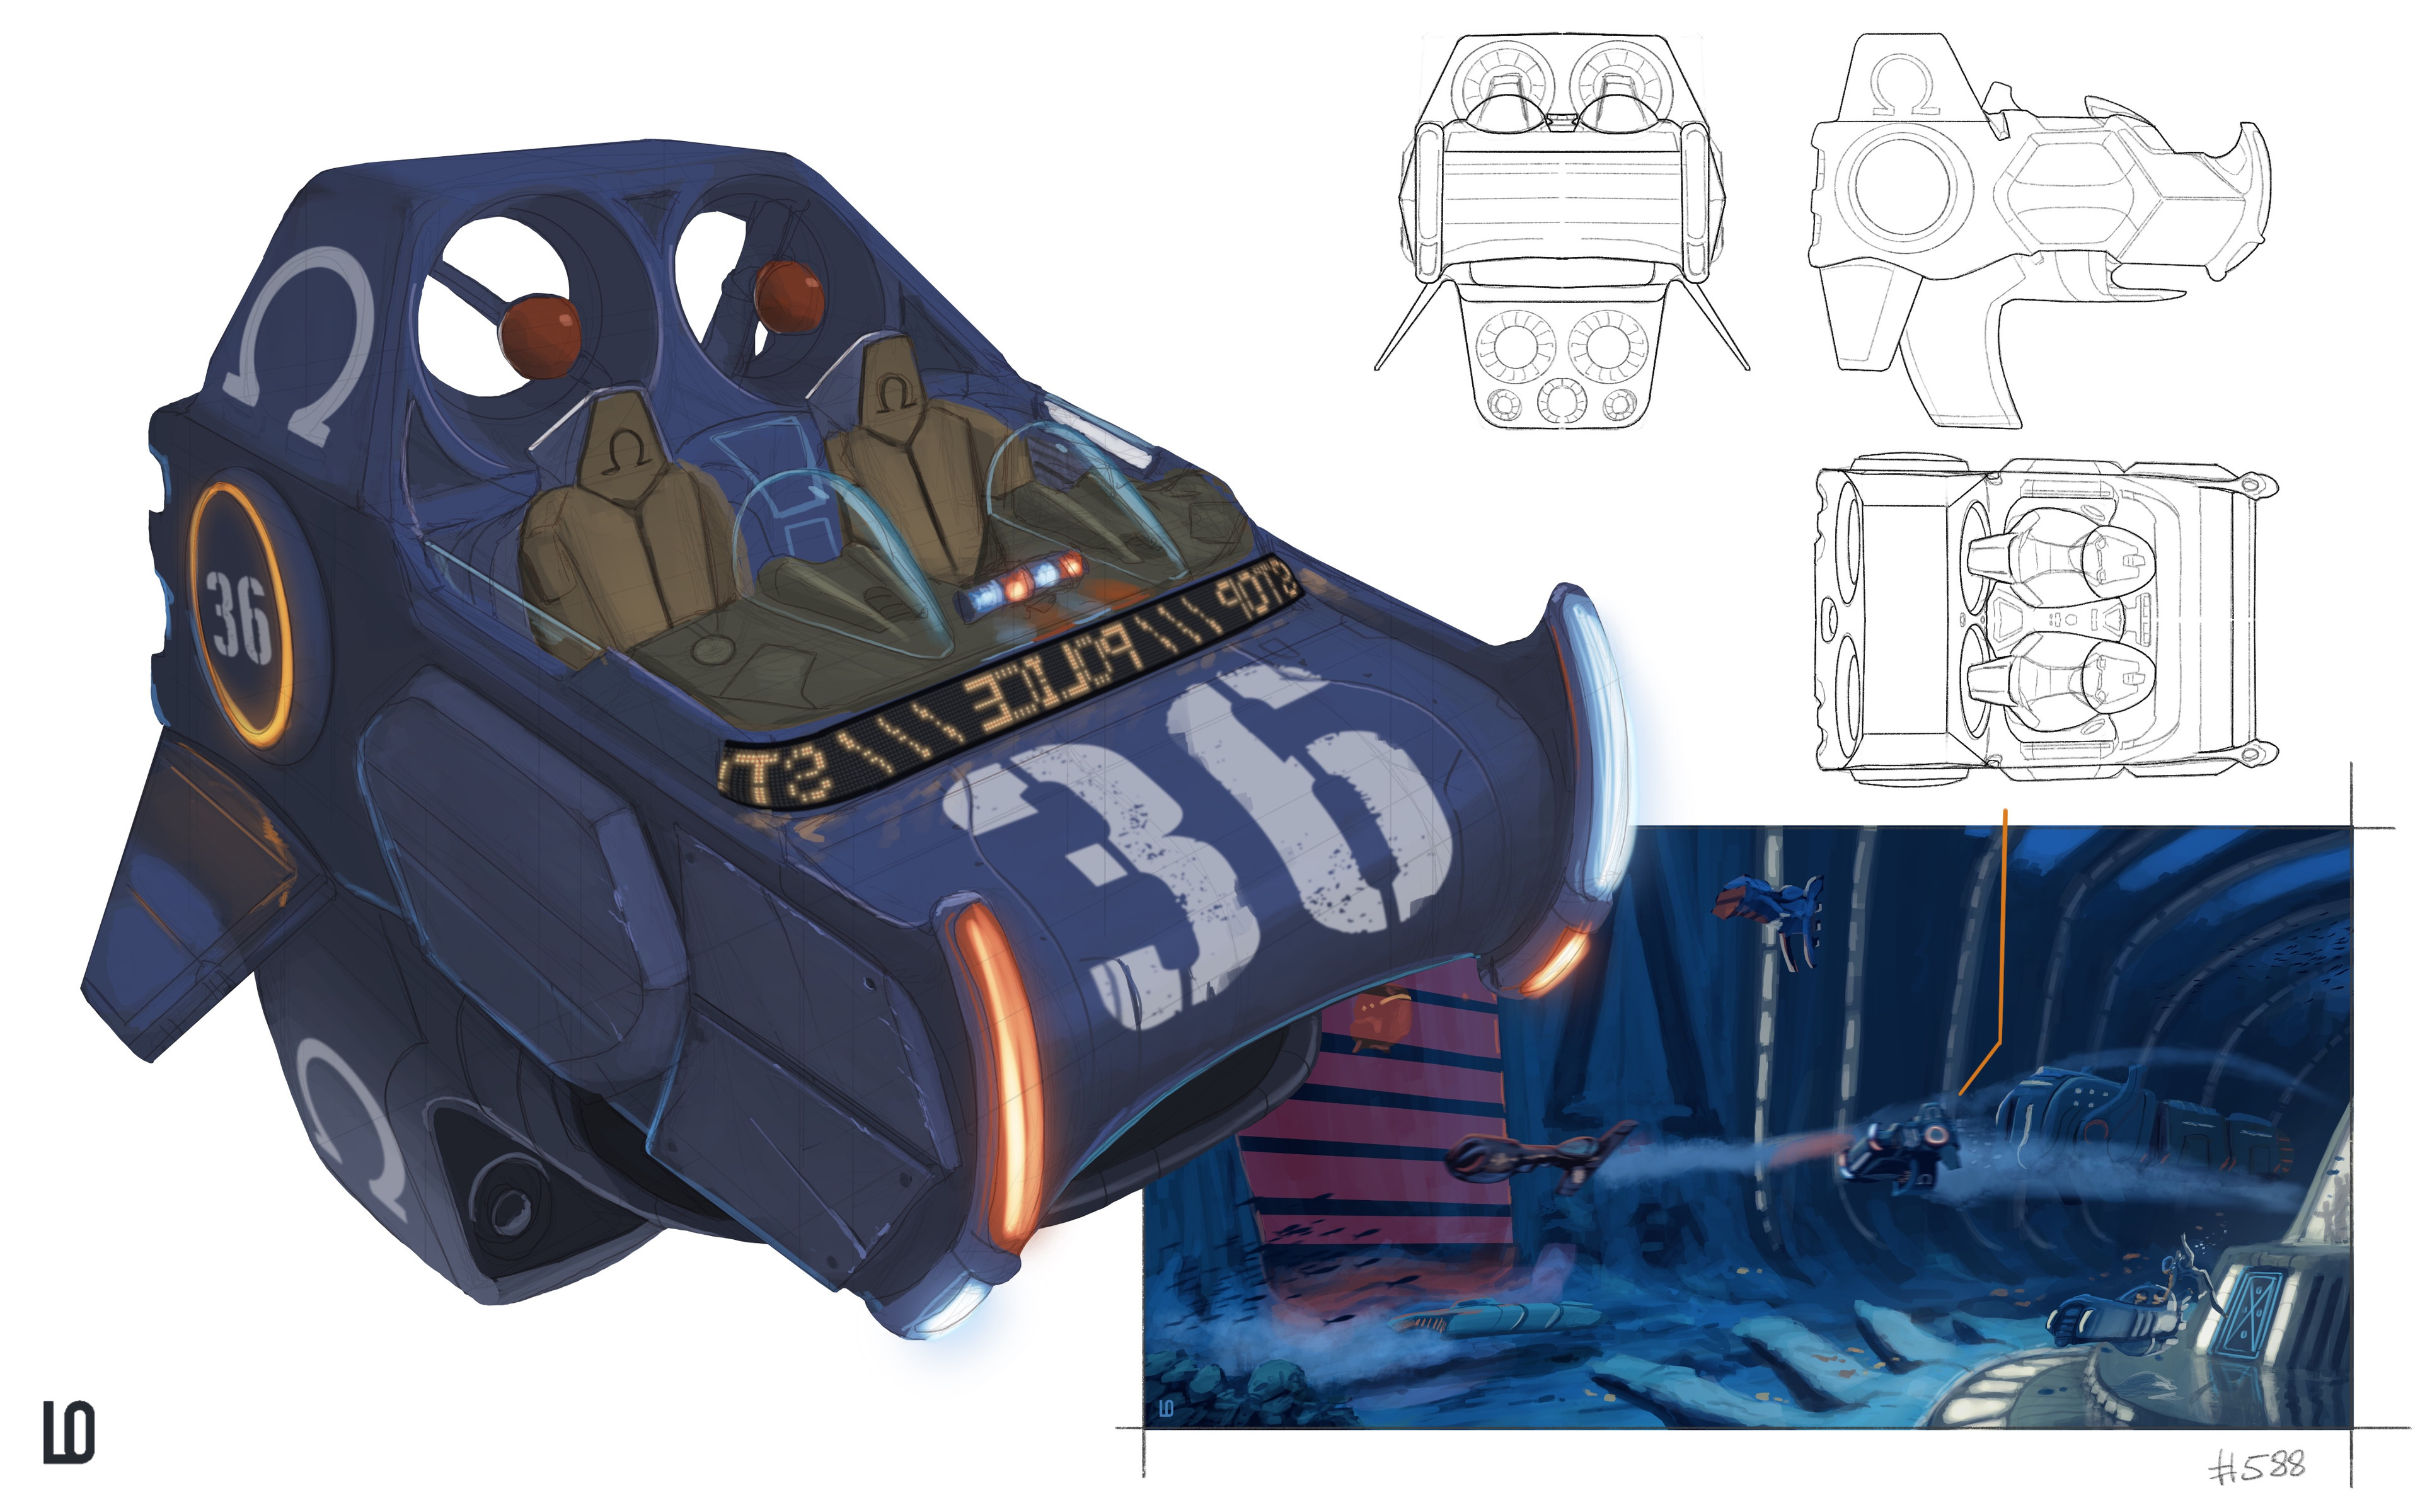 Quick-assault police sub, from New-Atlantis (3 hours)